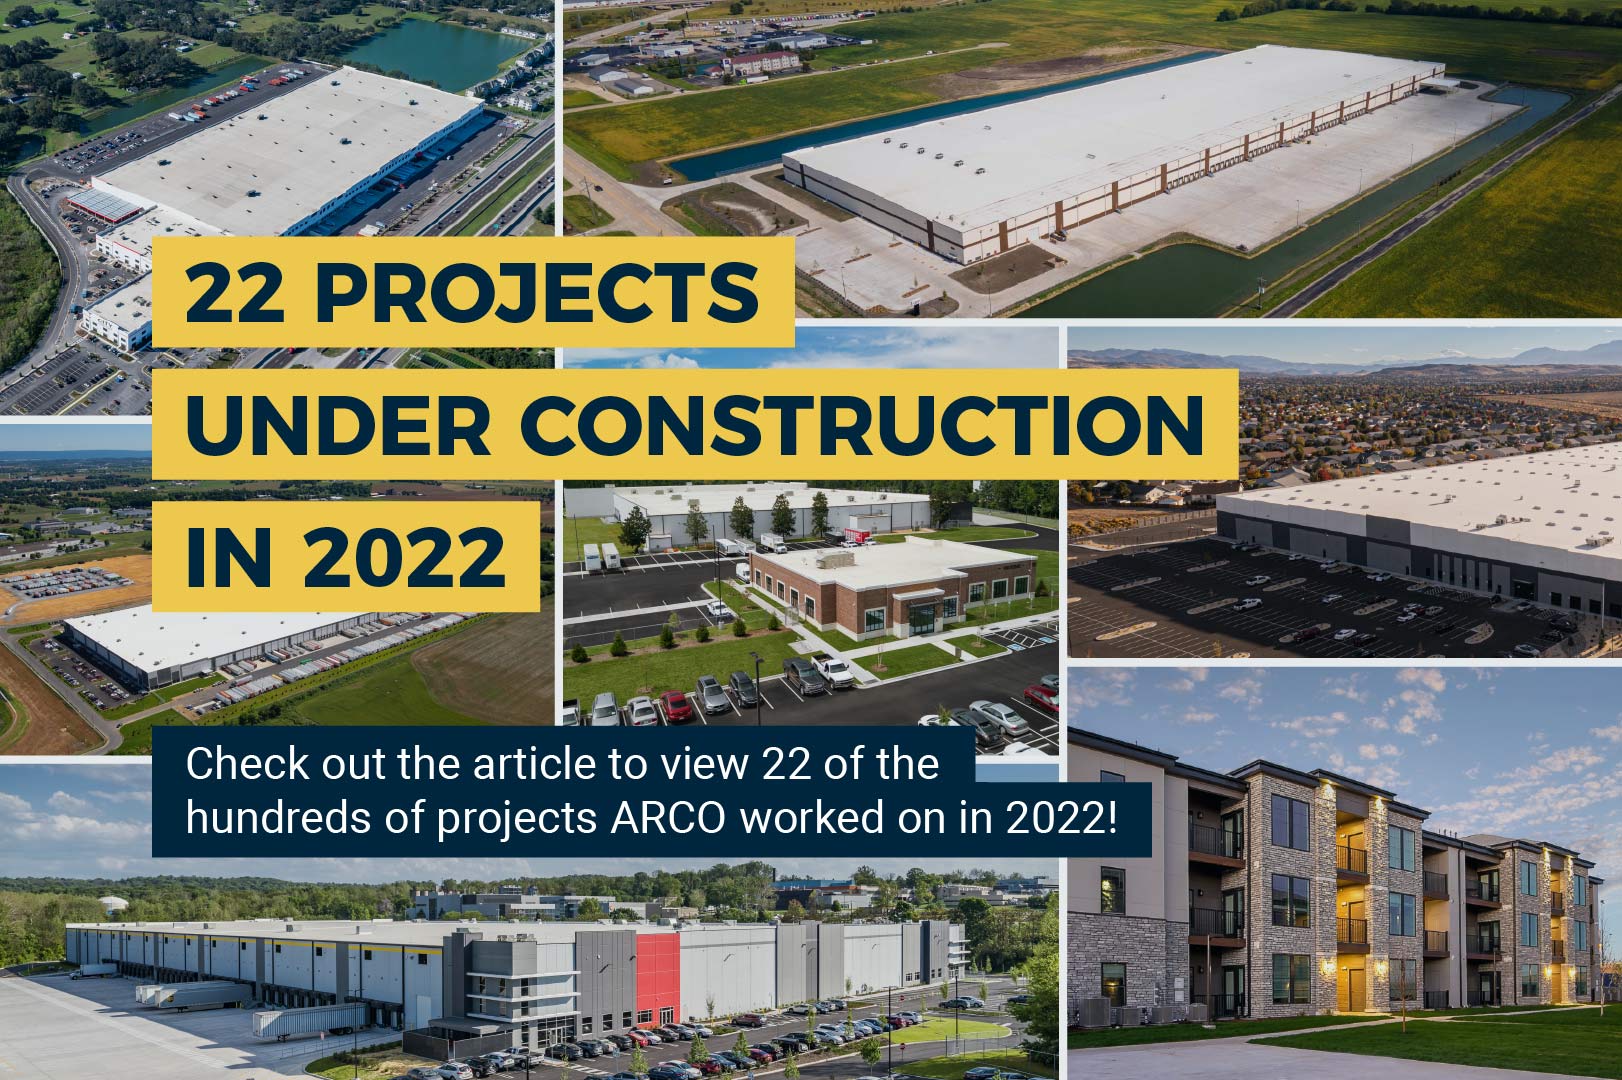 22 Projects Under Construction in 2022